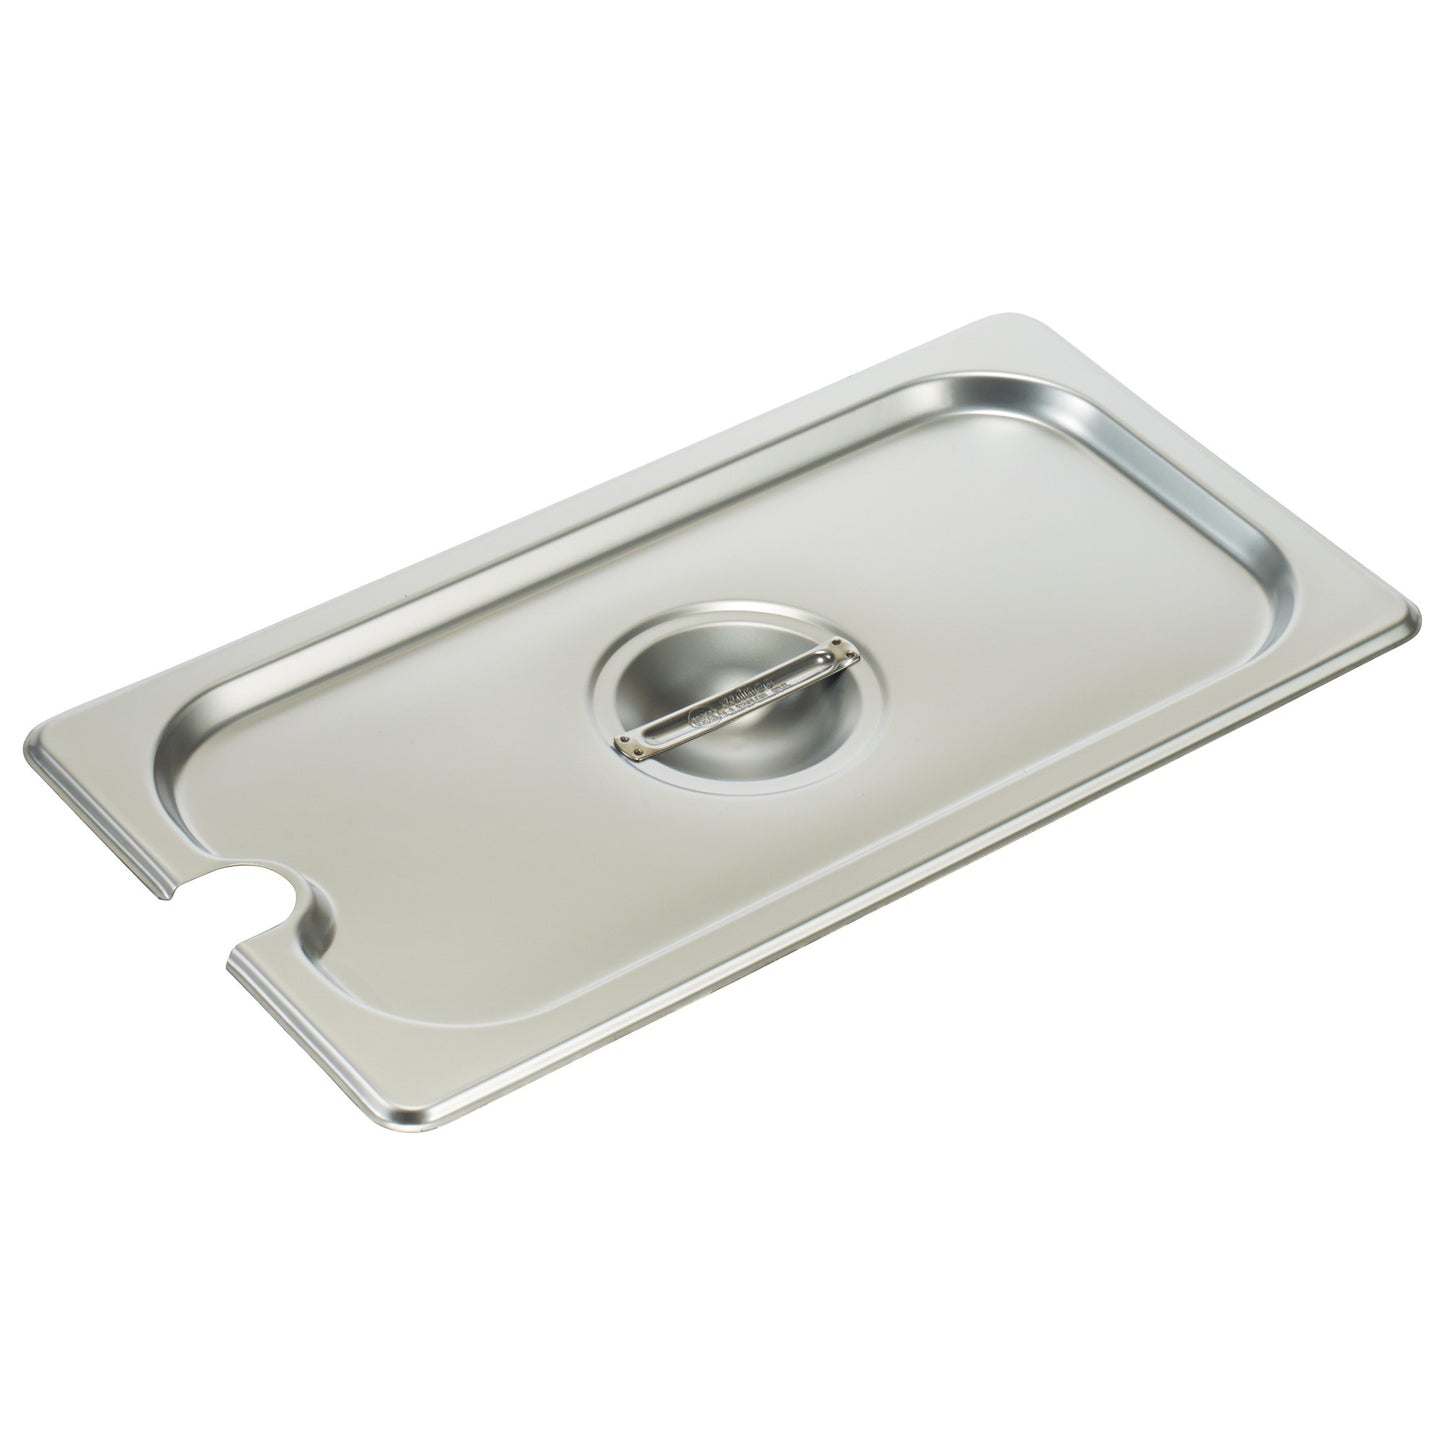 SPCT - 18/8 Stainless Steel Steam Pan Cover, Slotted - 1/3